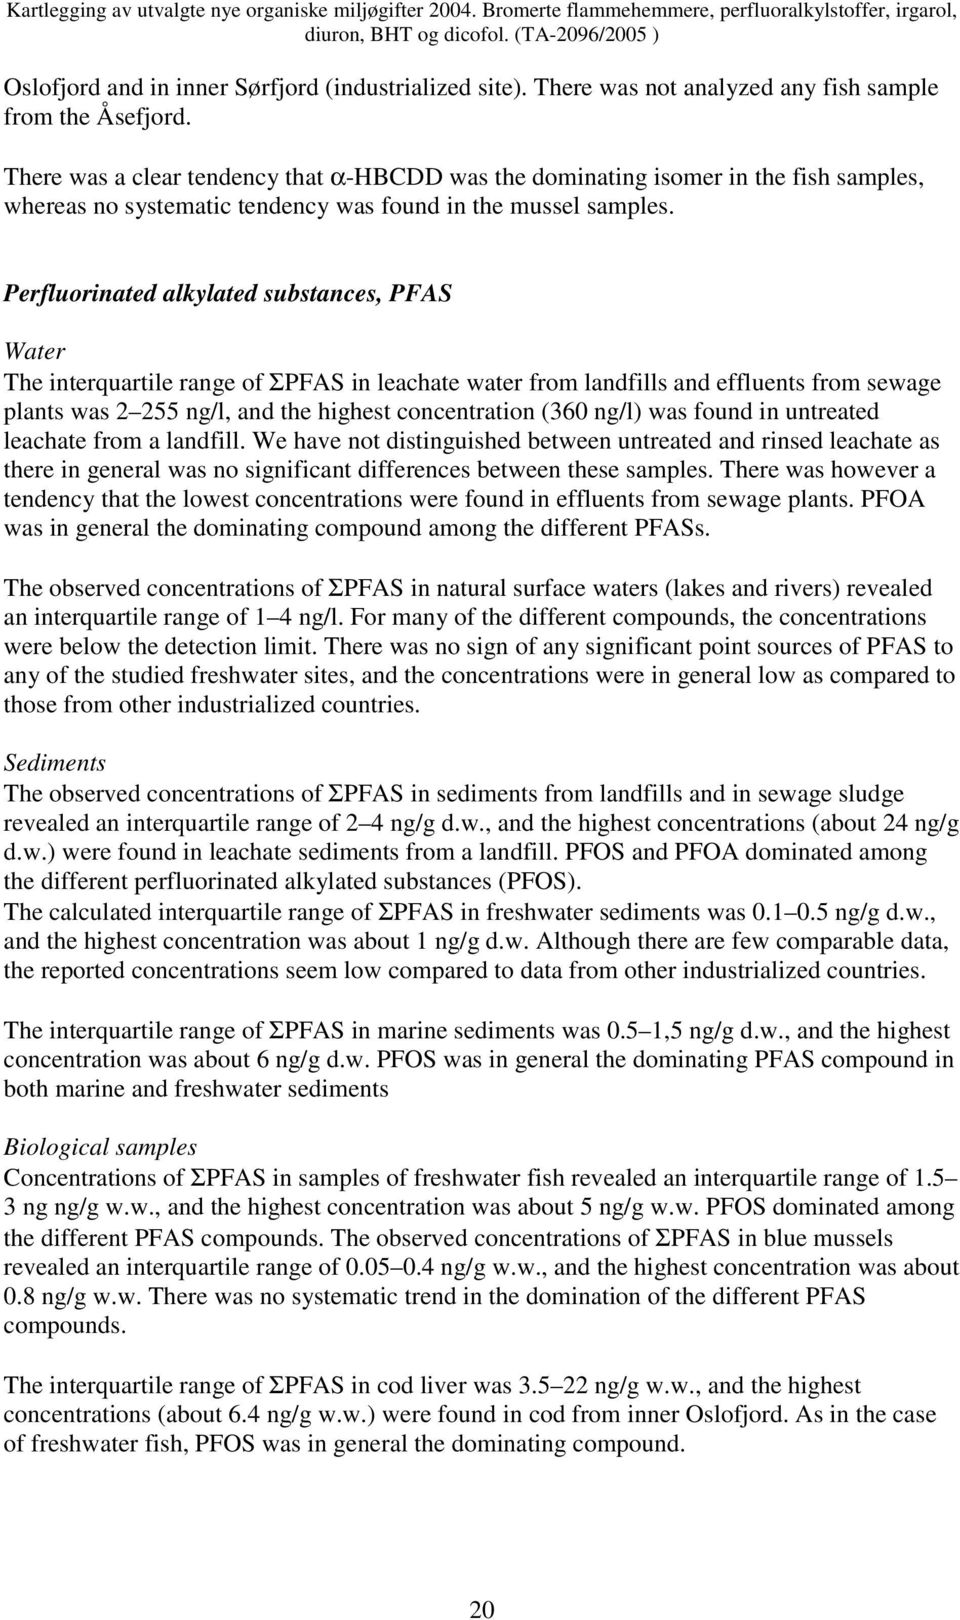 Perfluorinated alkylated substances, PFAS Water The interquartile range of ΣPFAS in leachate water from landfills and effluents from sewage plants was 2 255 ng/l, and the highest concentration (360